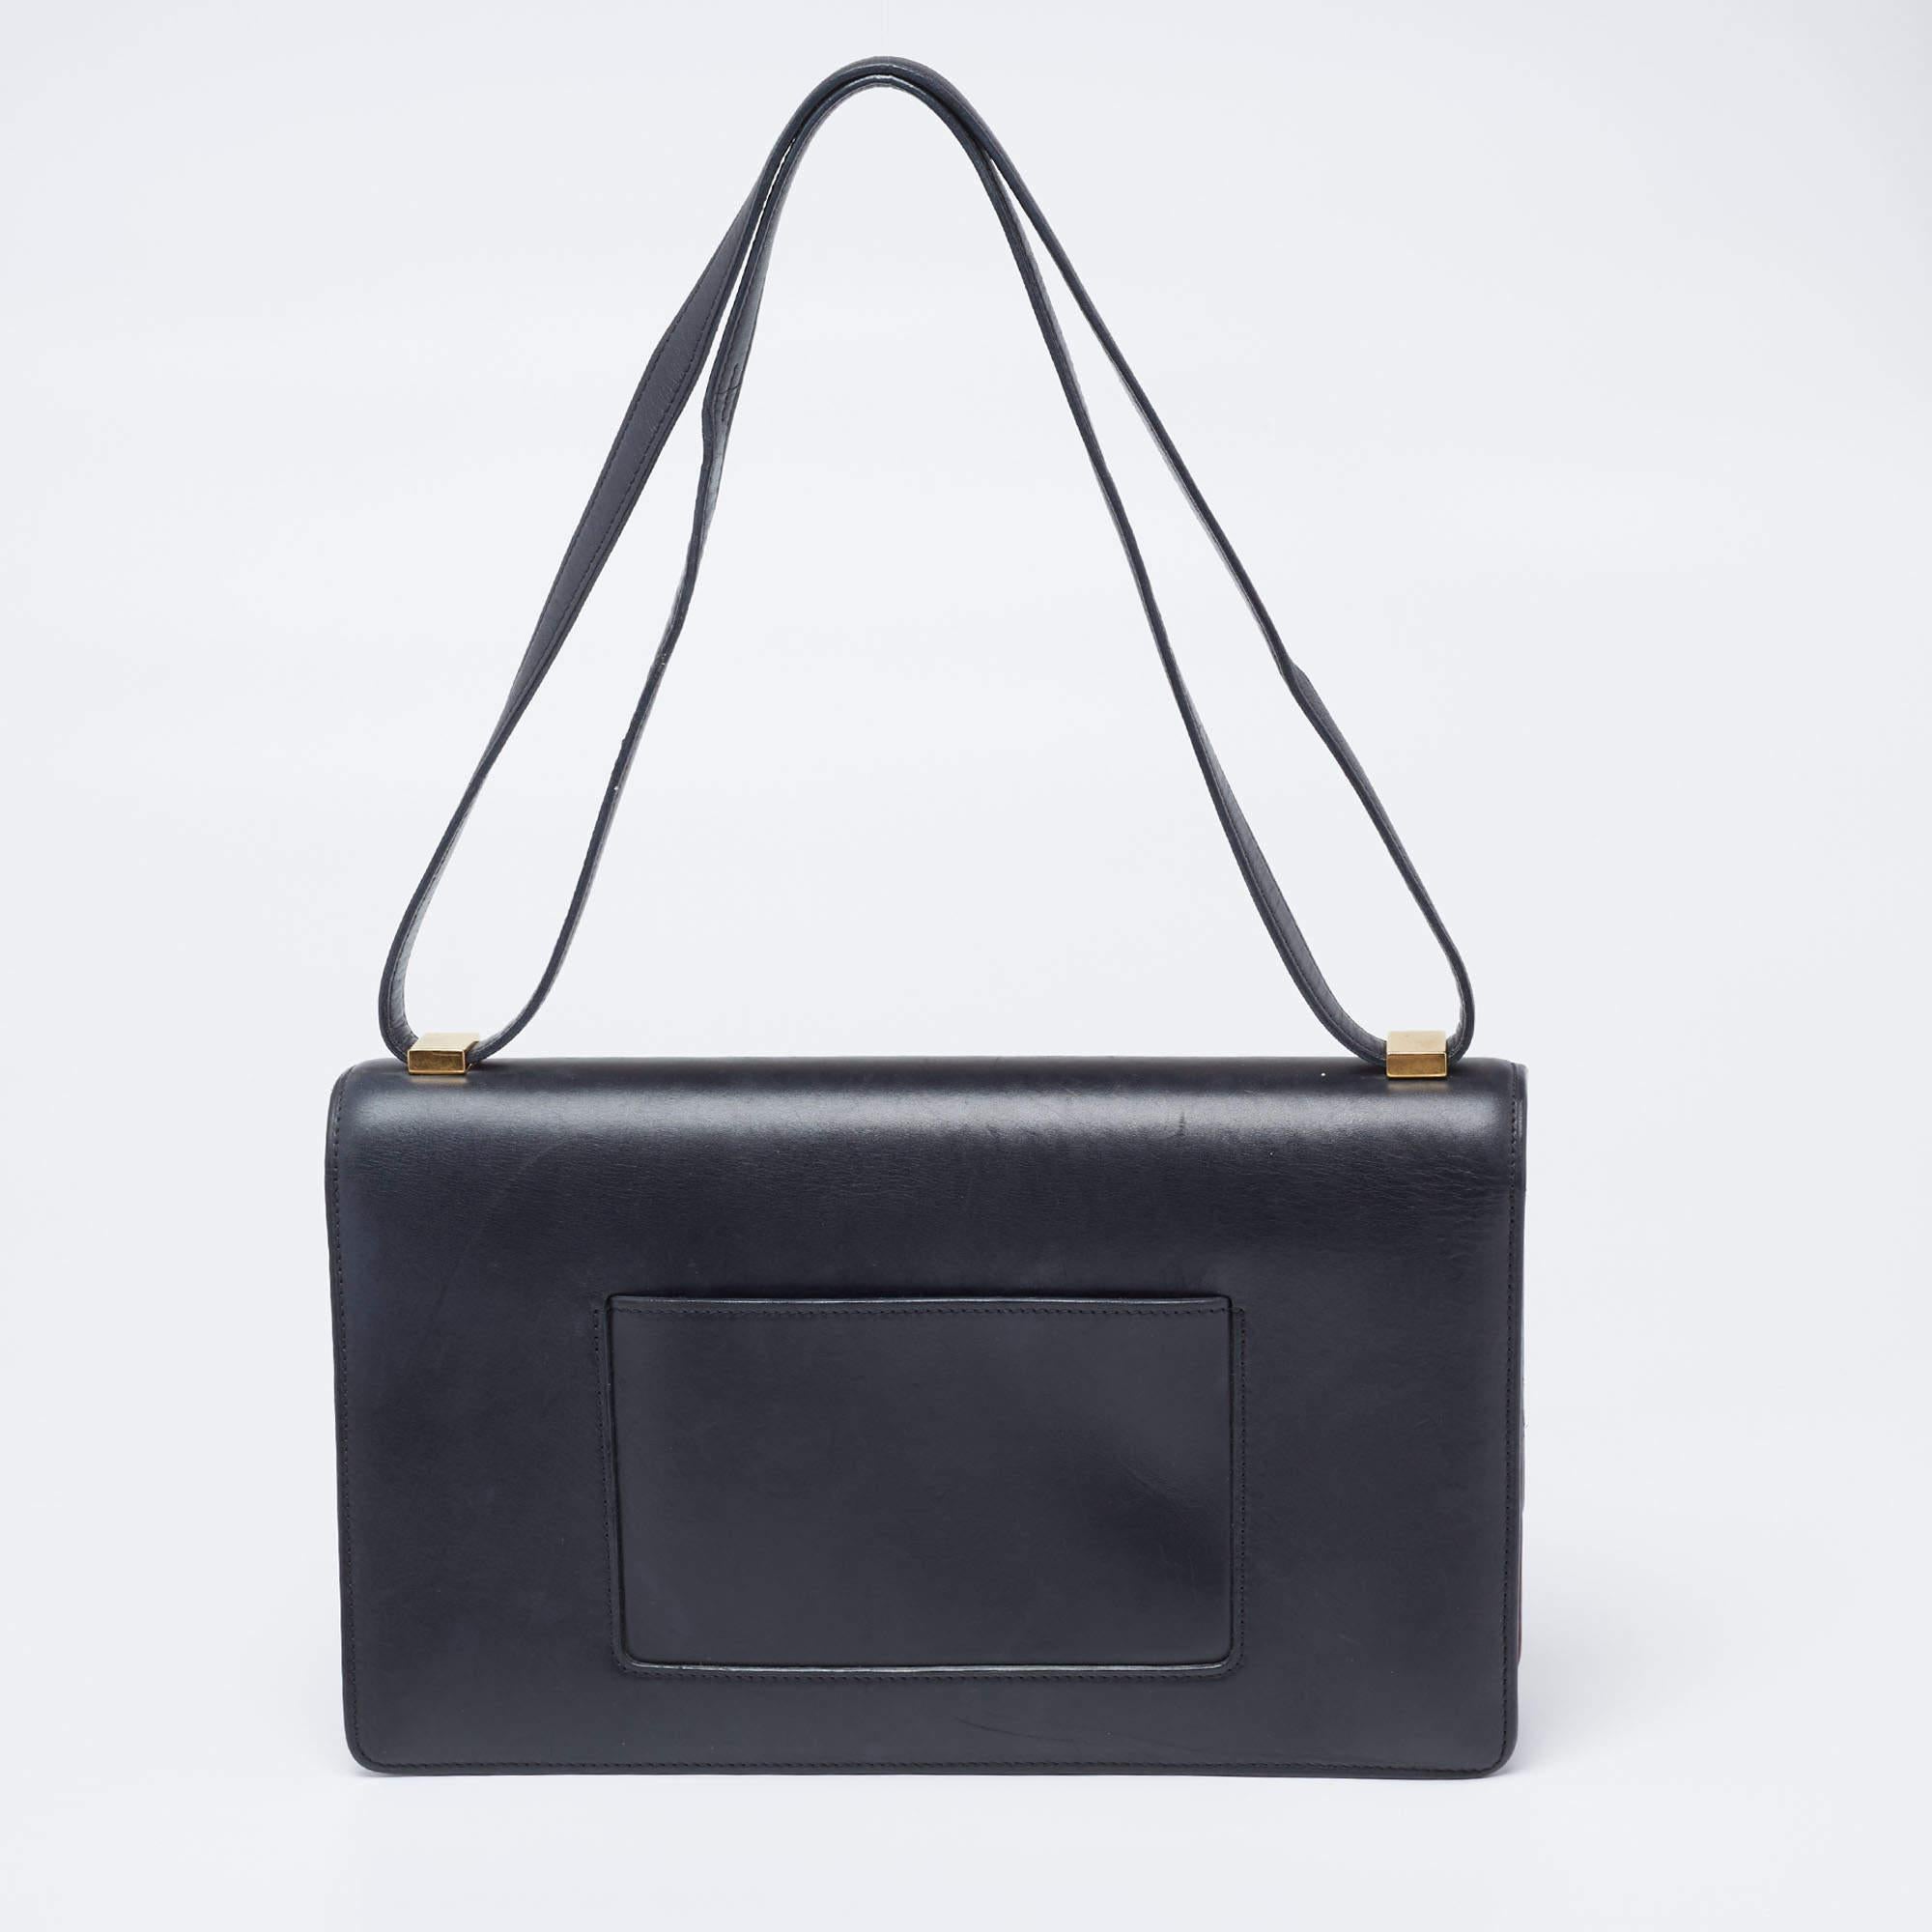 This Case bag from the house of Celine will be a classy companion with formals as well as casuals. Crafted from leather in red and black, the bag features a minimalistic design. The lock closure on the front flap opens to a compartmentalized